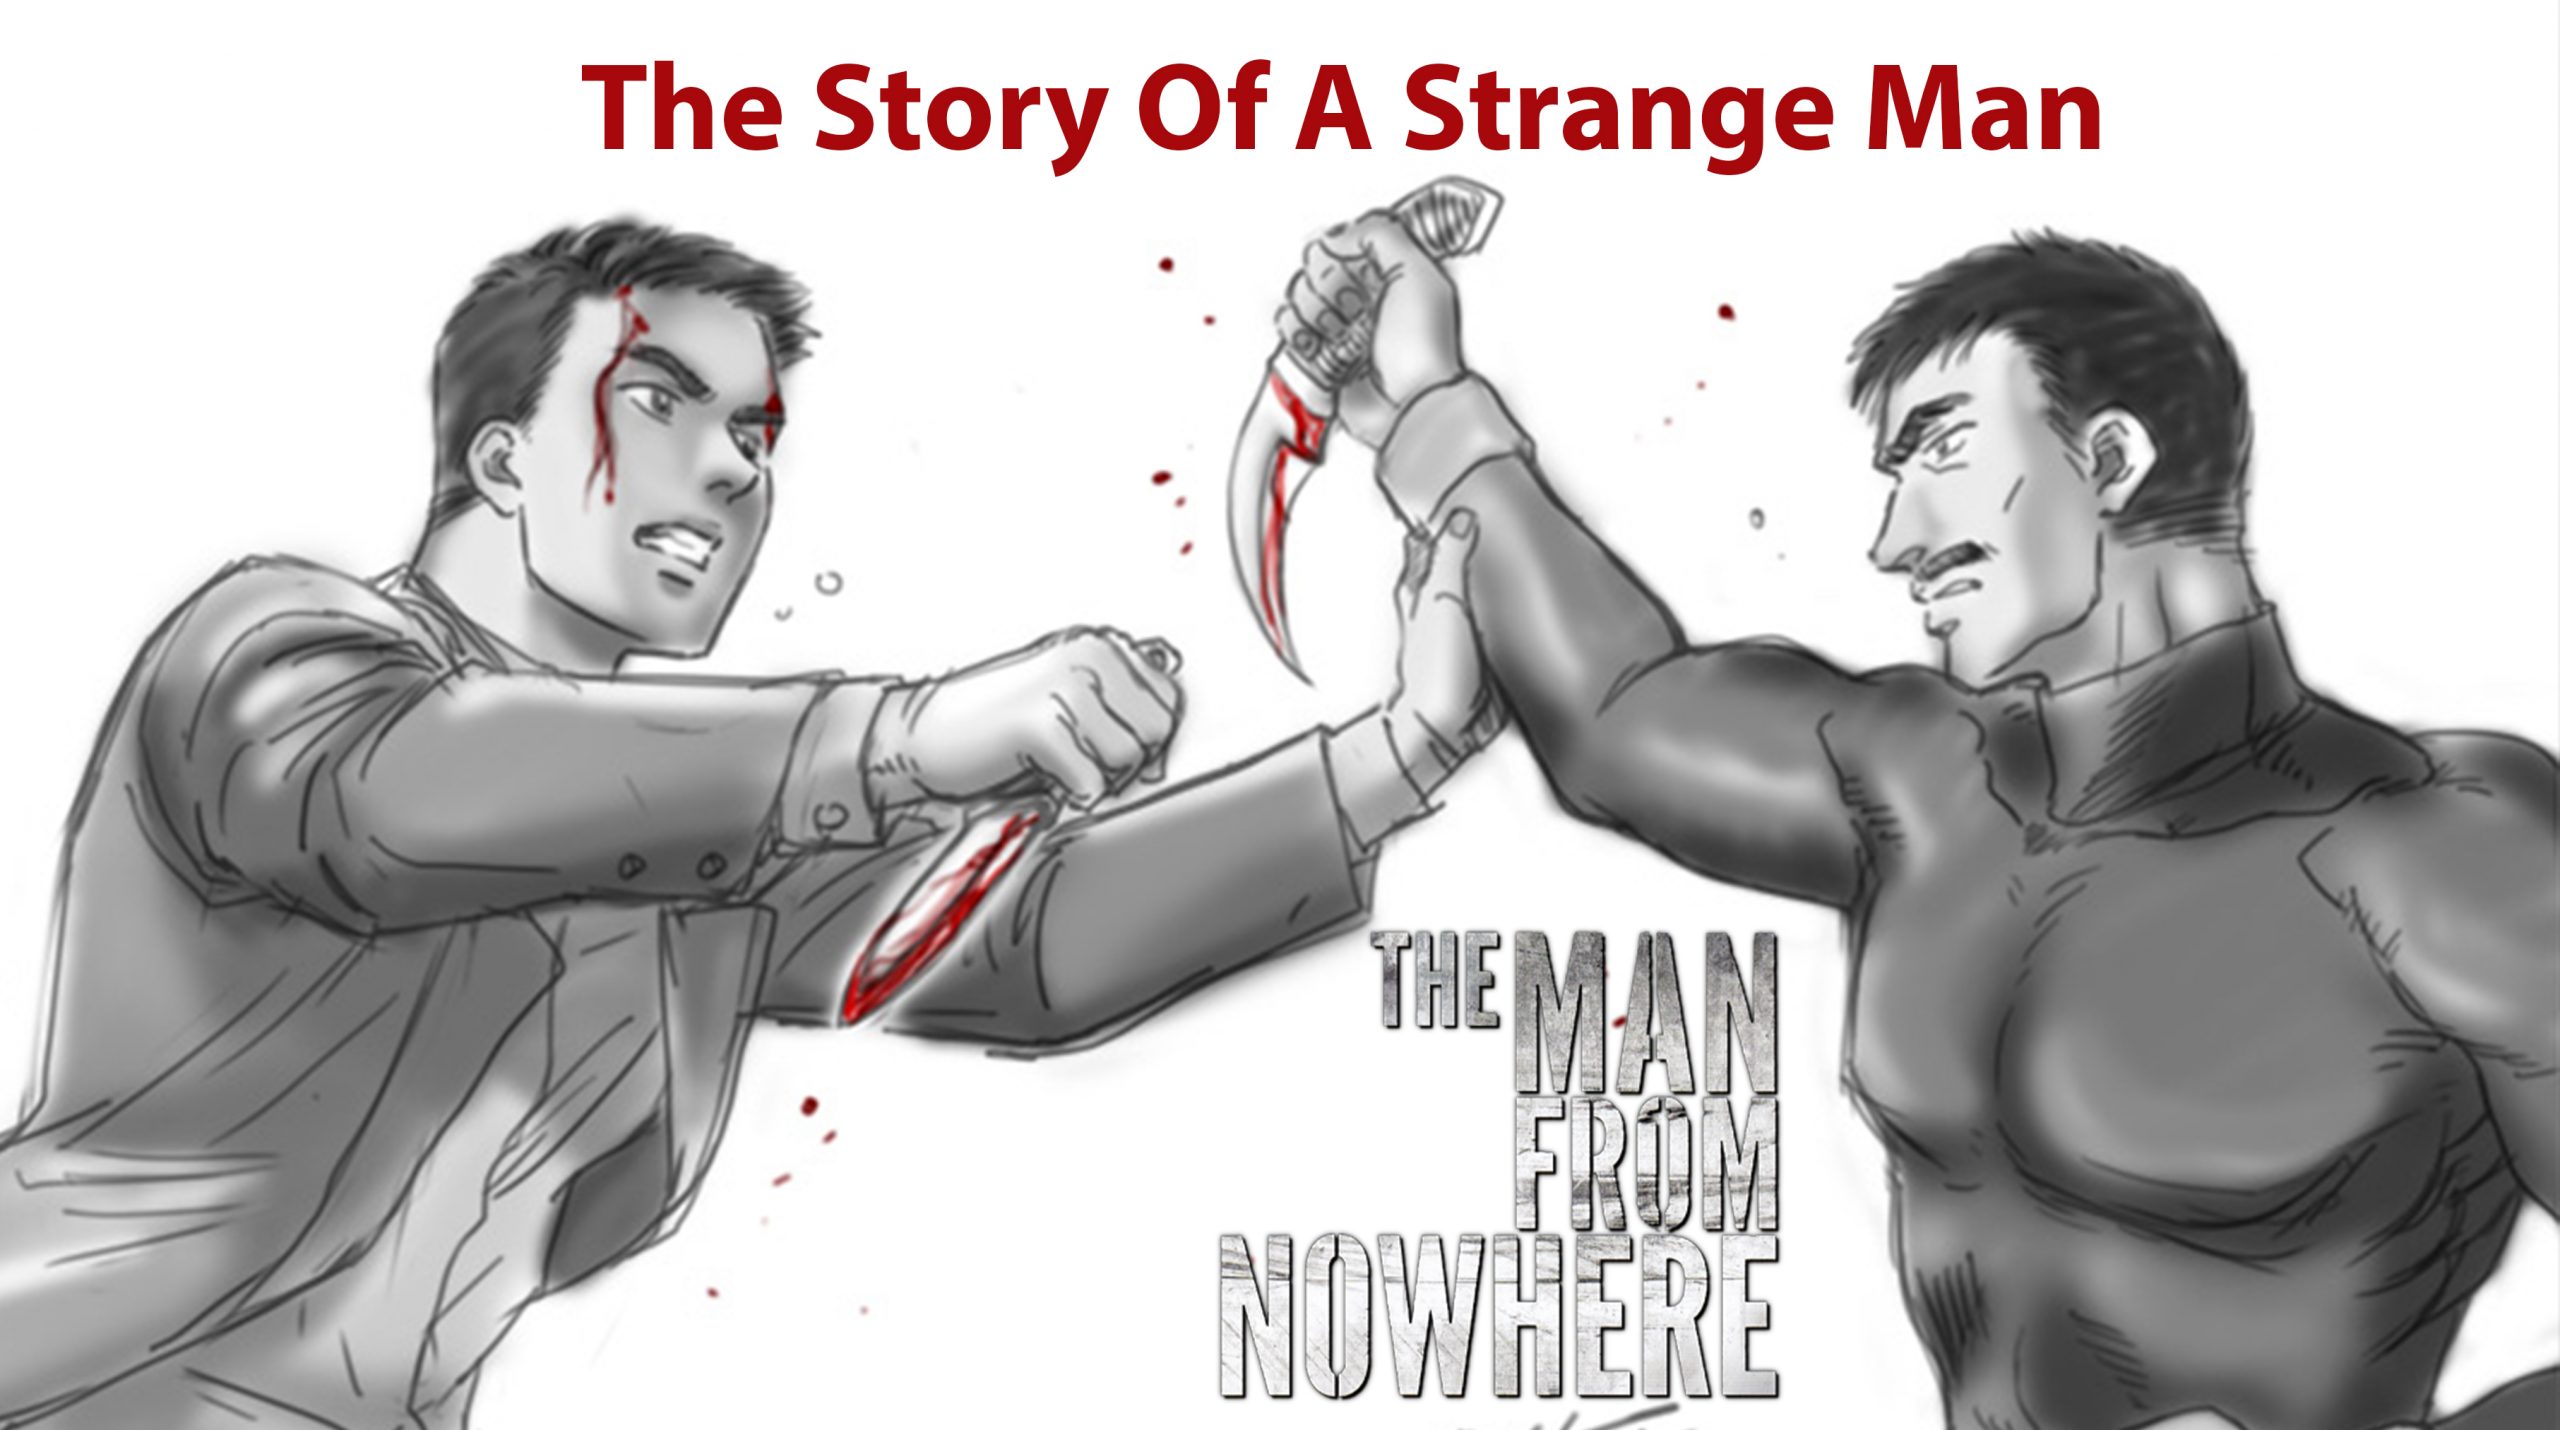 The Man From Nowhere: The Story Of A Strange Man